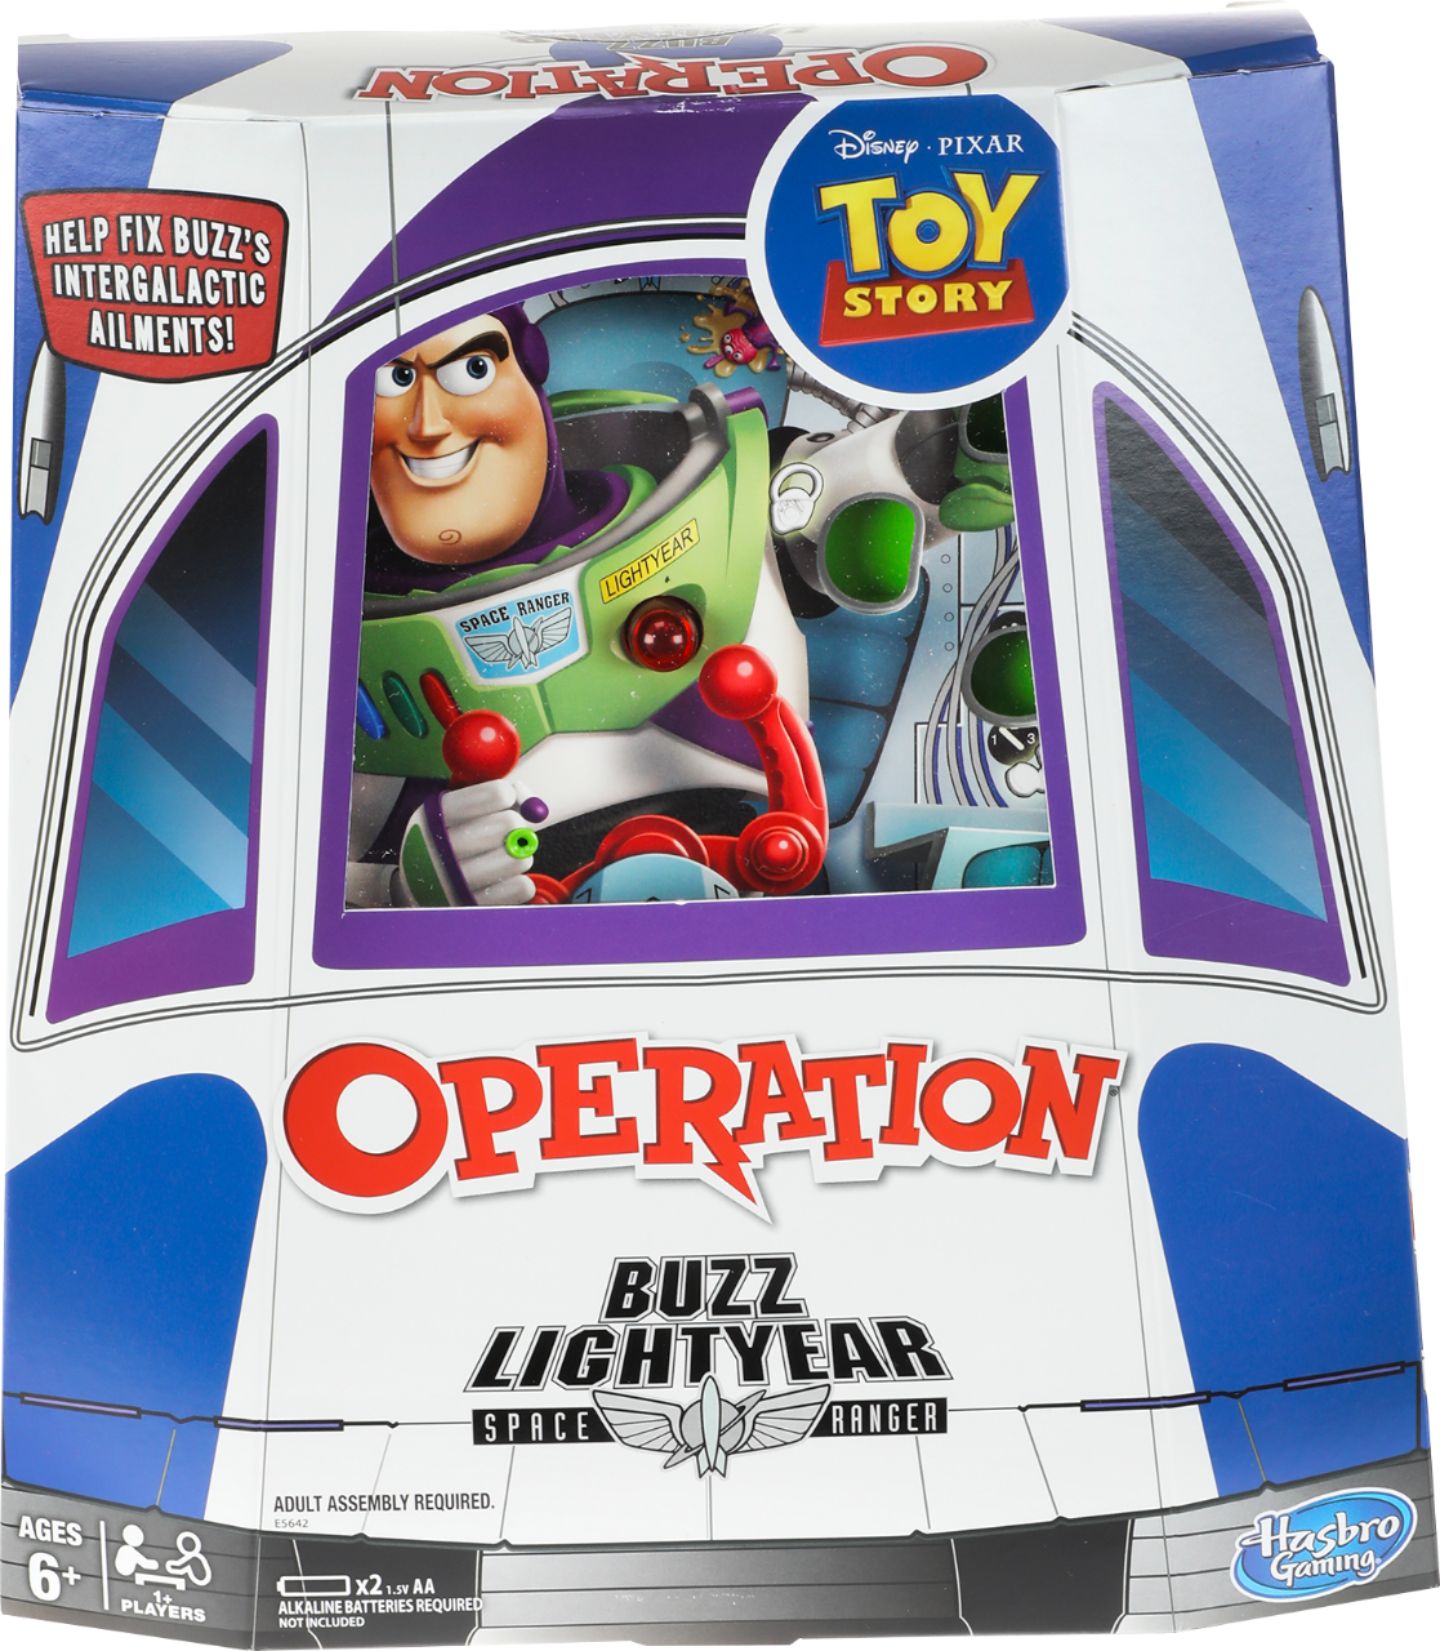 toy story board game